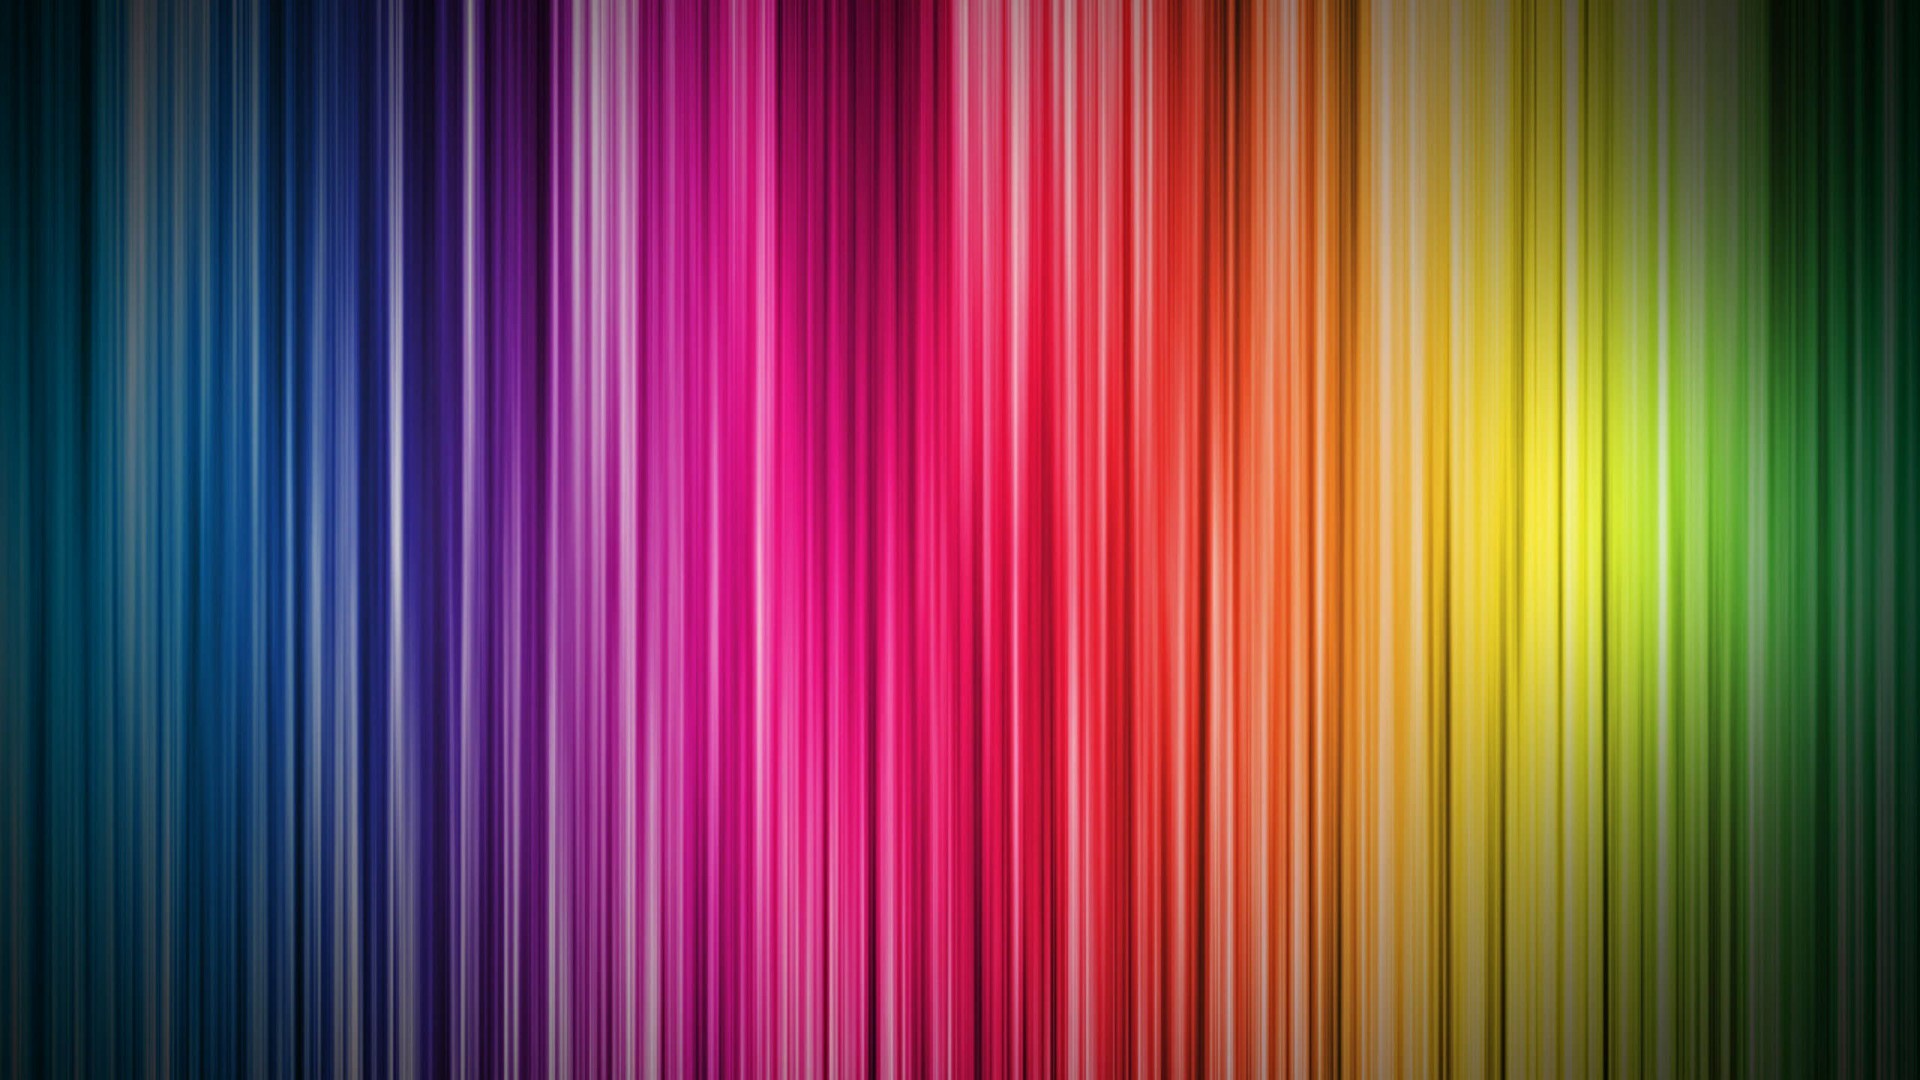 Rainbow Colors: An abstract art form that uses basic regular shapes. 1920x1080 Full HD Background.